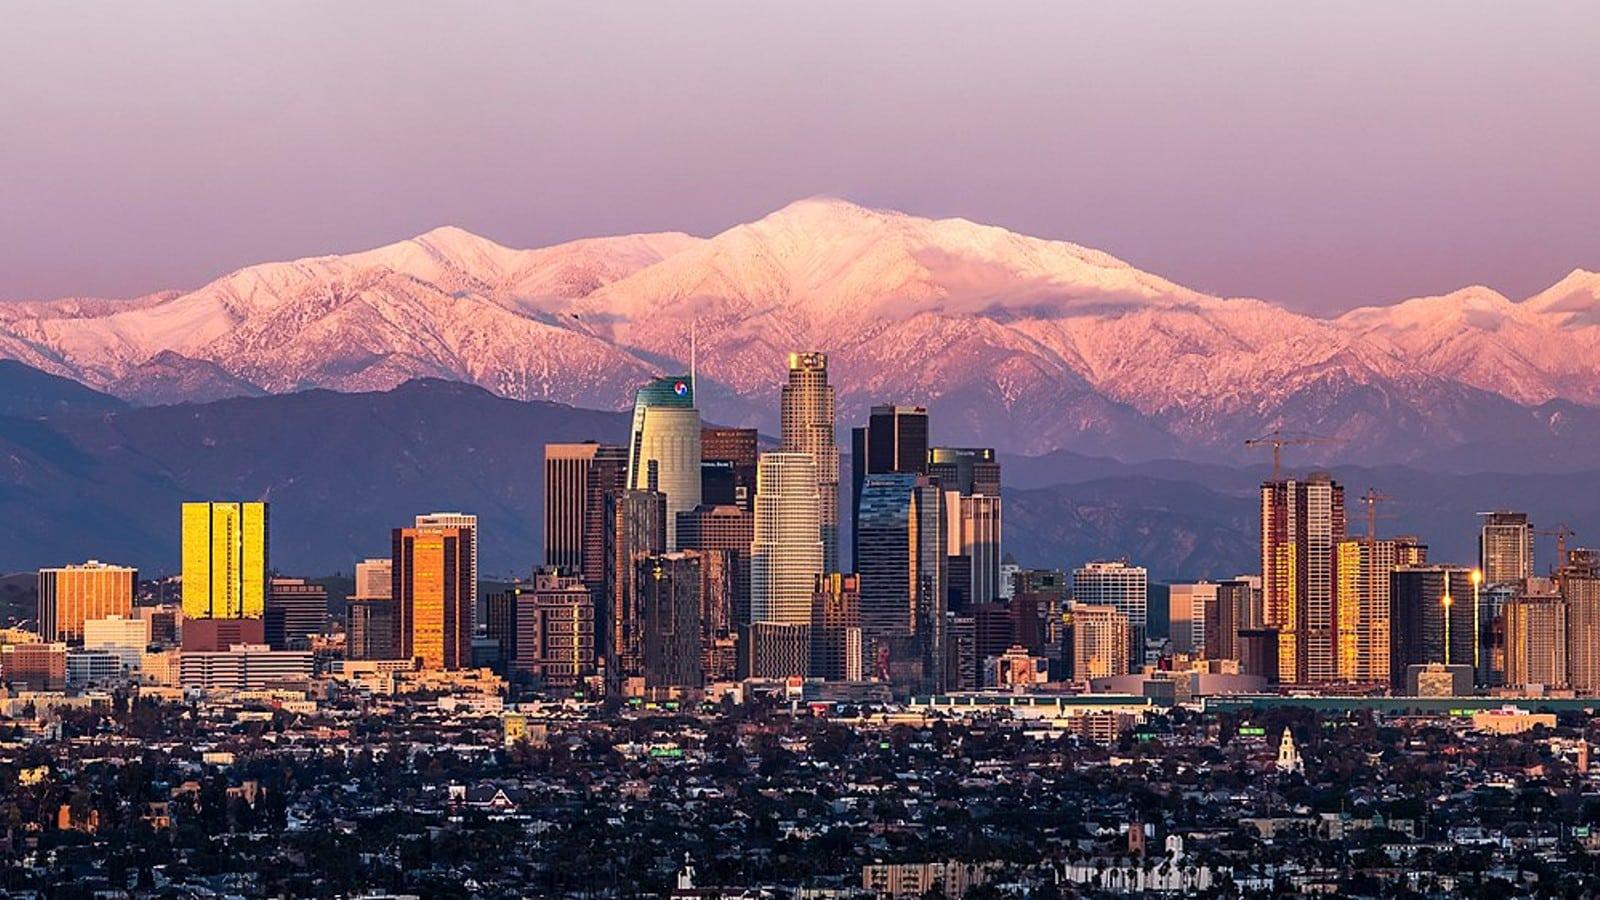 Image of the Los Angeles cityscape